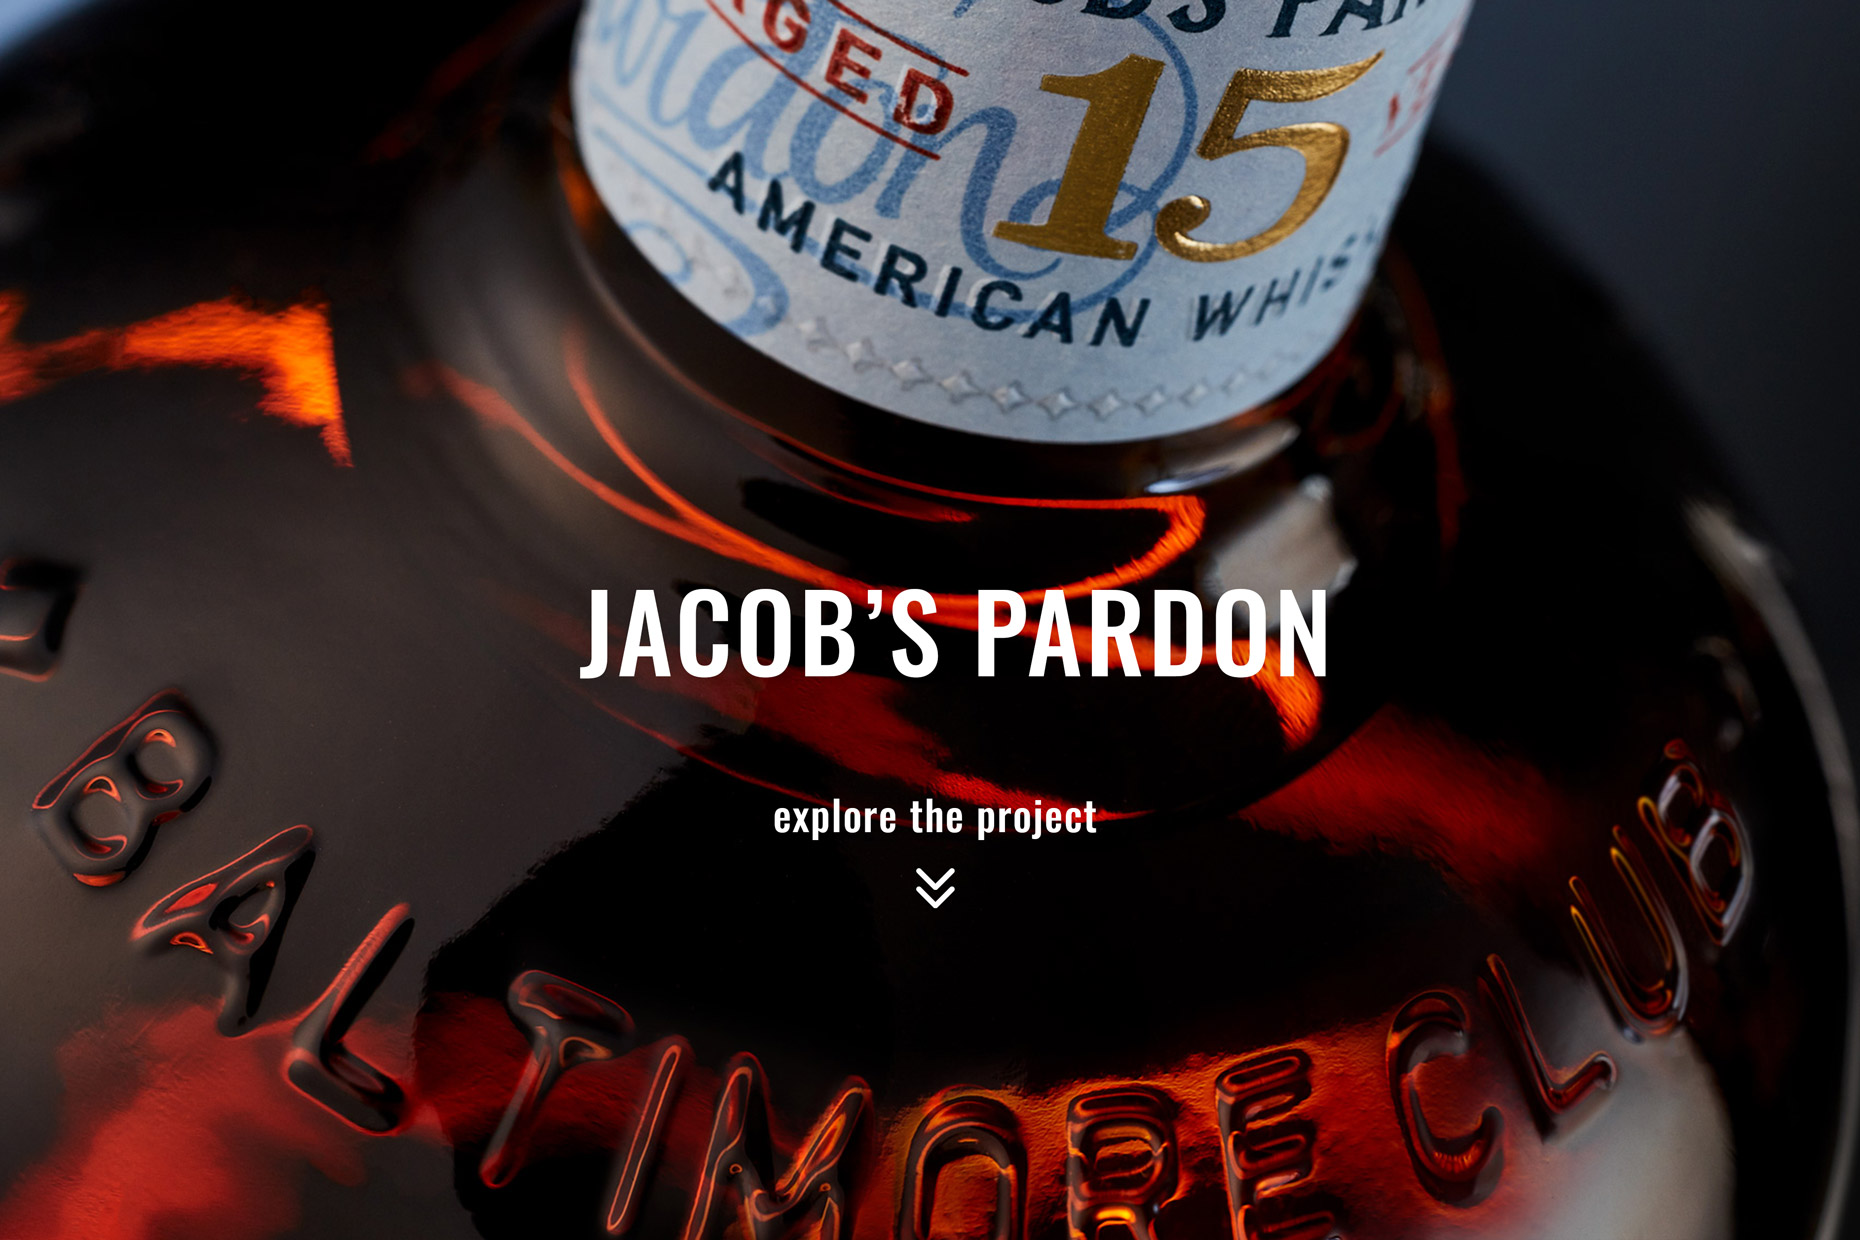 Jacobs Pardon Whiskey| Photography Project